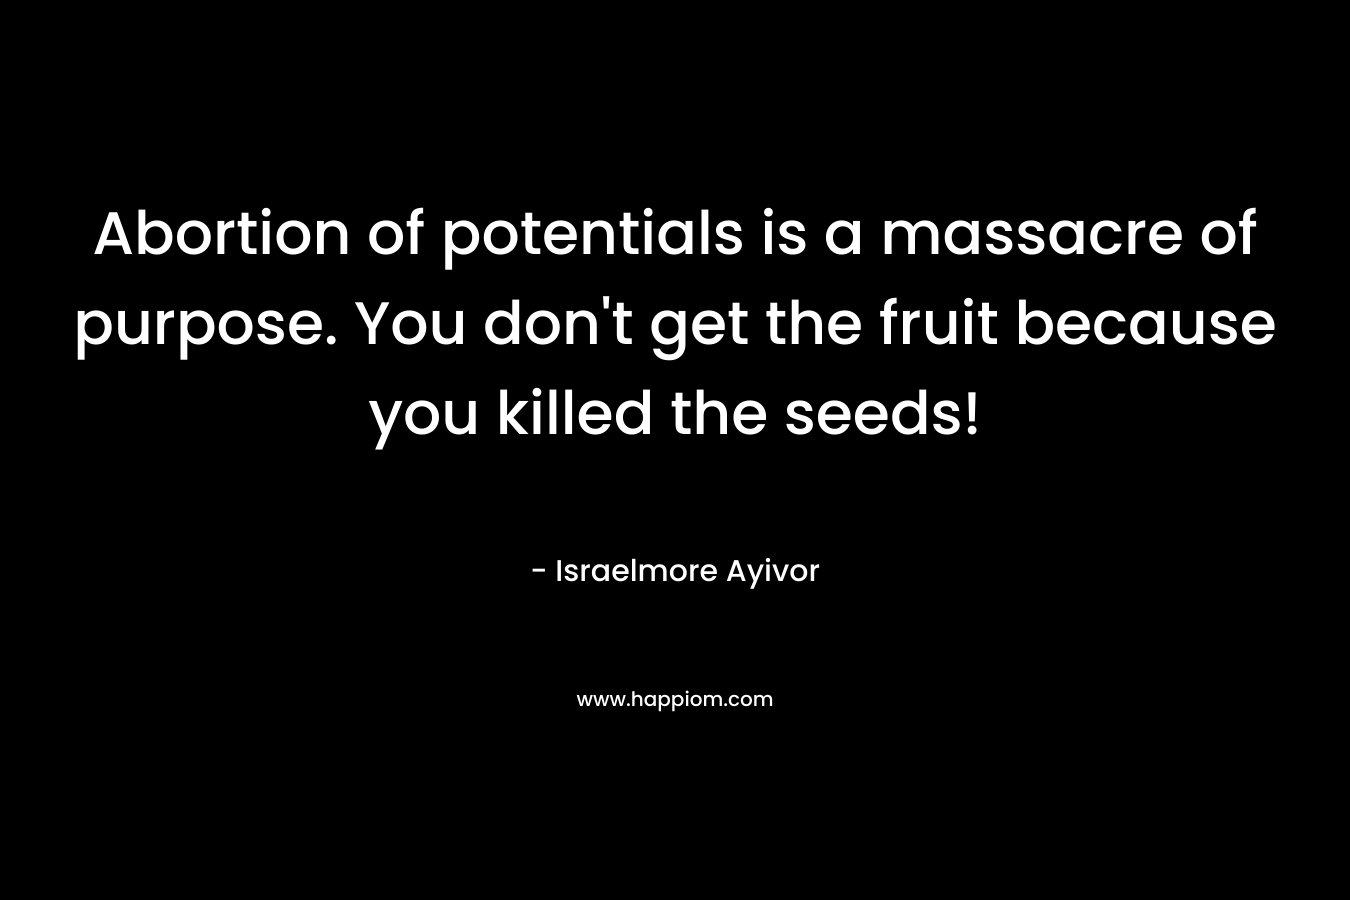 Abortion of potentials is a massacre of purpose. You don’t get the fruit because you killed the seeds! – Israelmore Ayivor